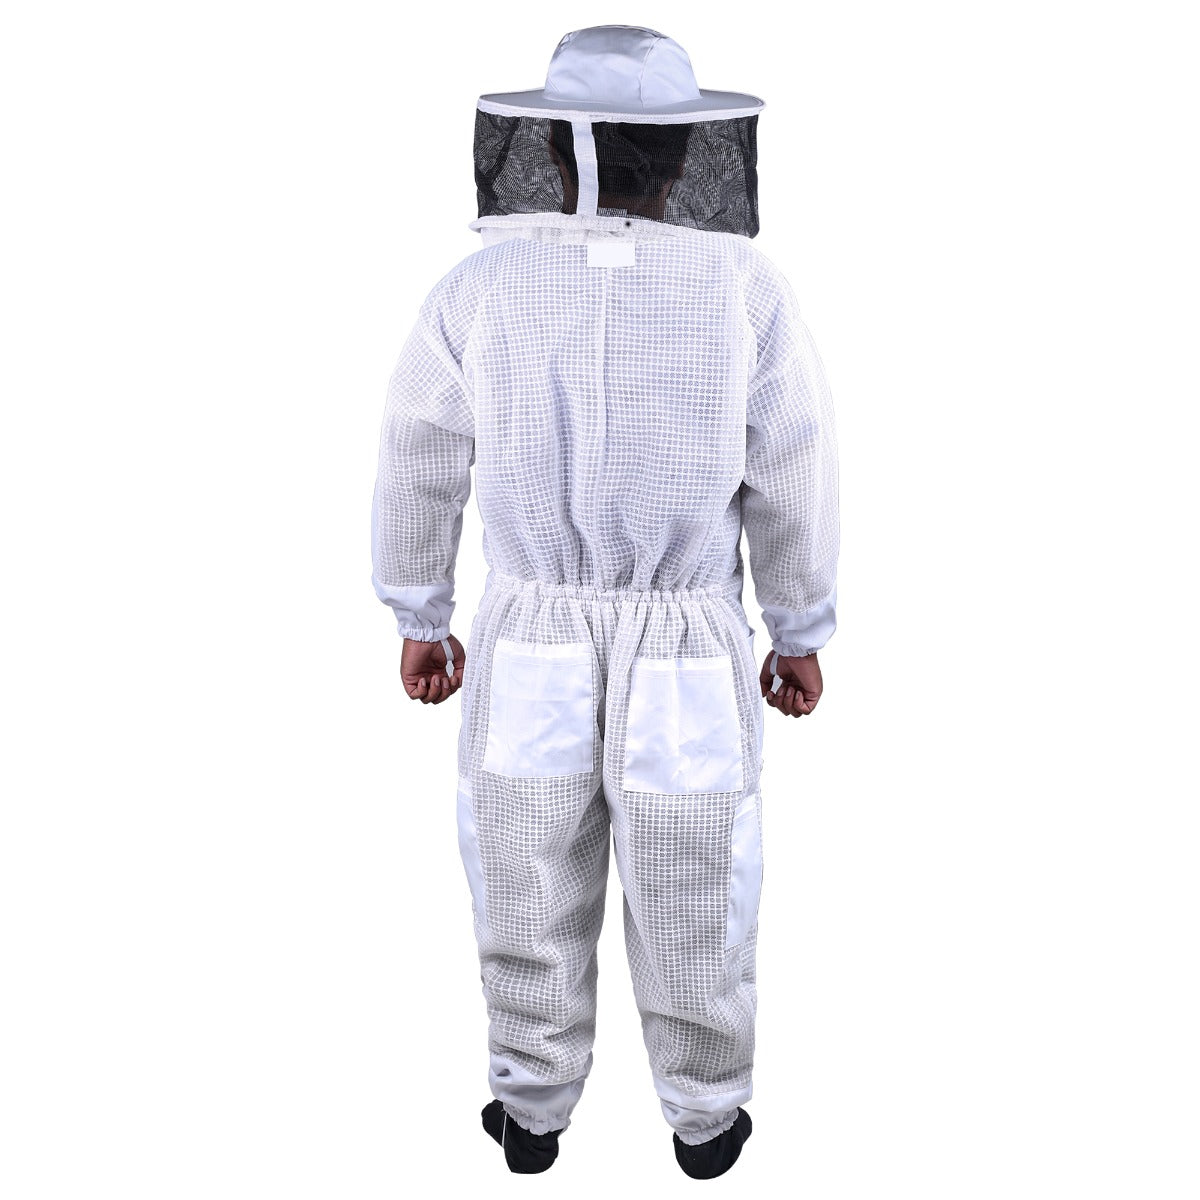 Beekeeping Bee Full Suit 3 Layer Mesh Ultra Cool Ventilated Round Head Beekeeping Protective Gear SIZE 4XL